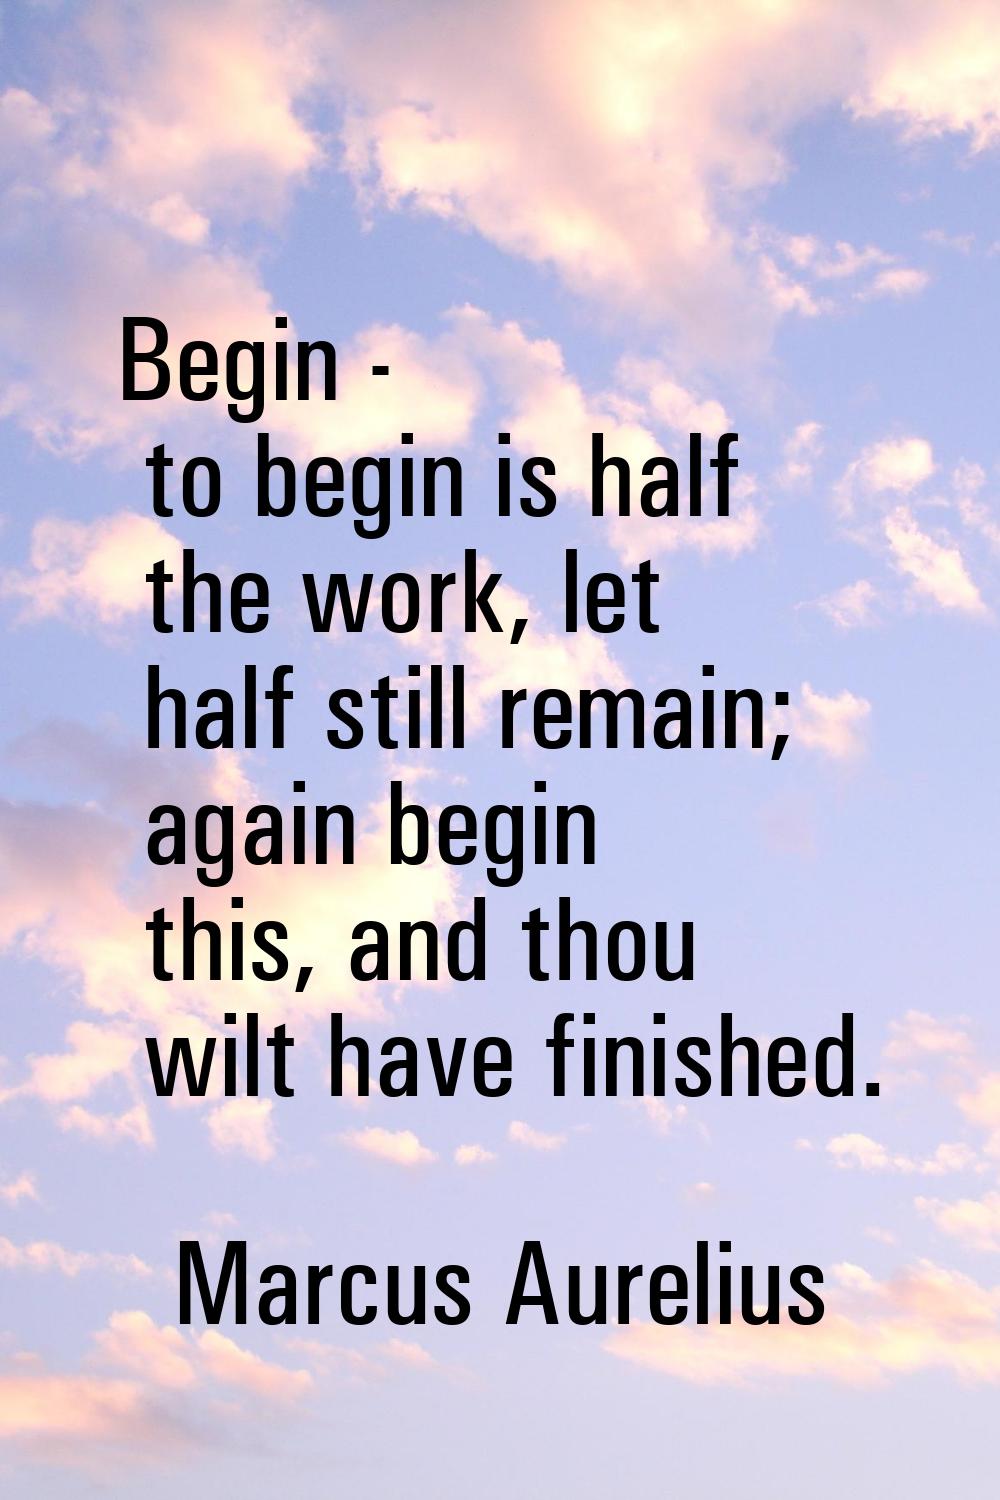 Begin - to begin is half the work, let half still remain; again begin this, and thou wilt have fini